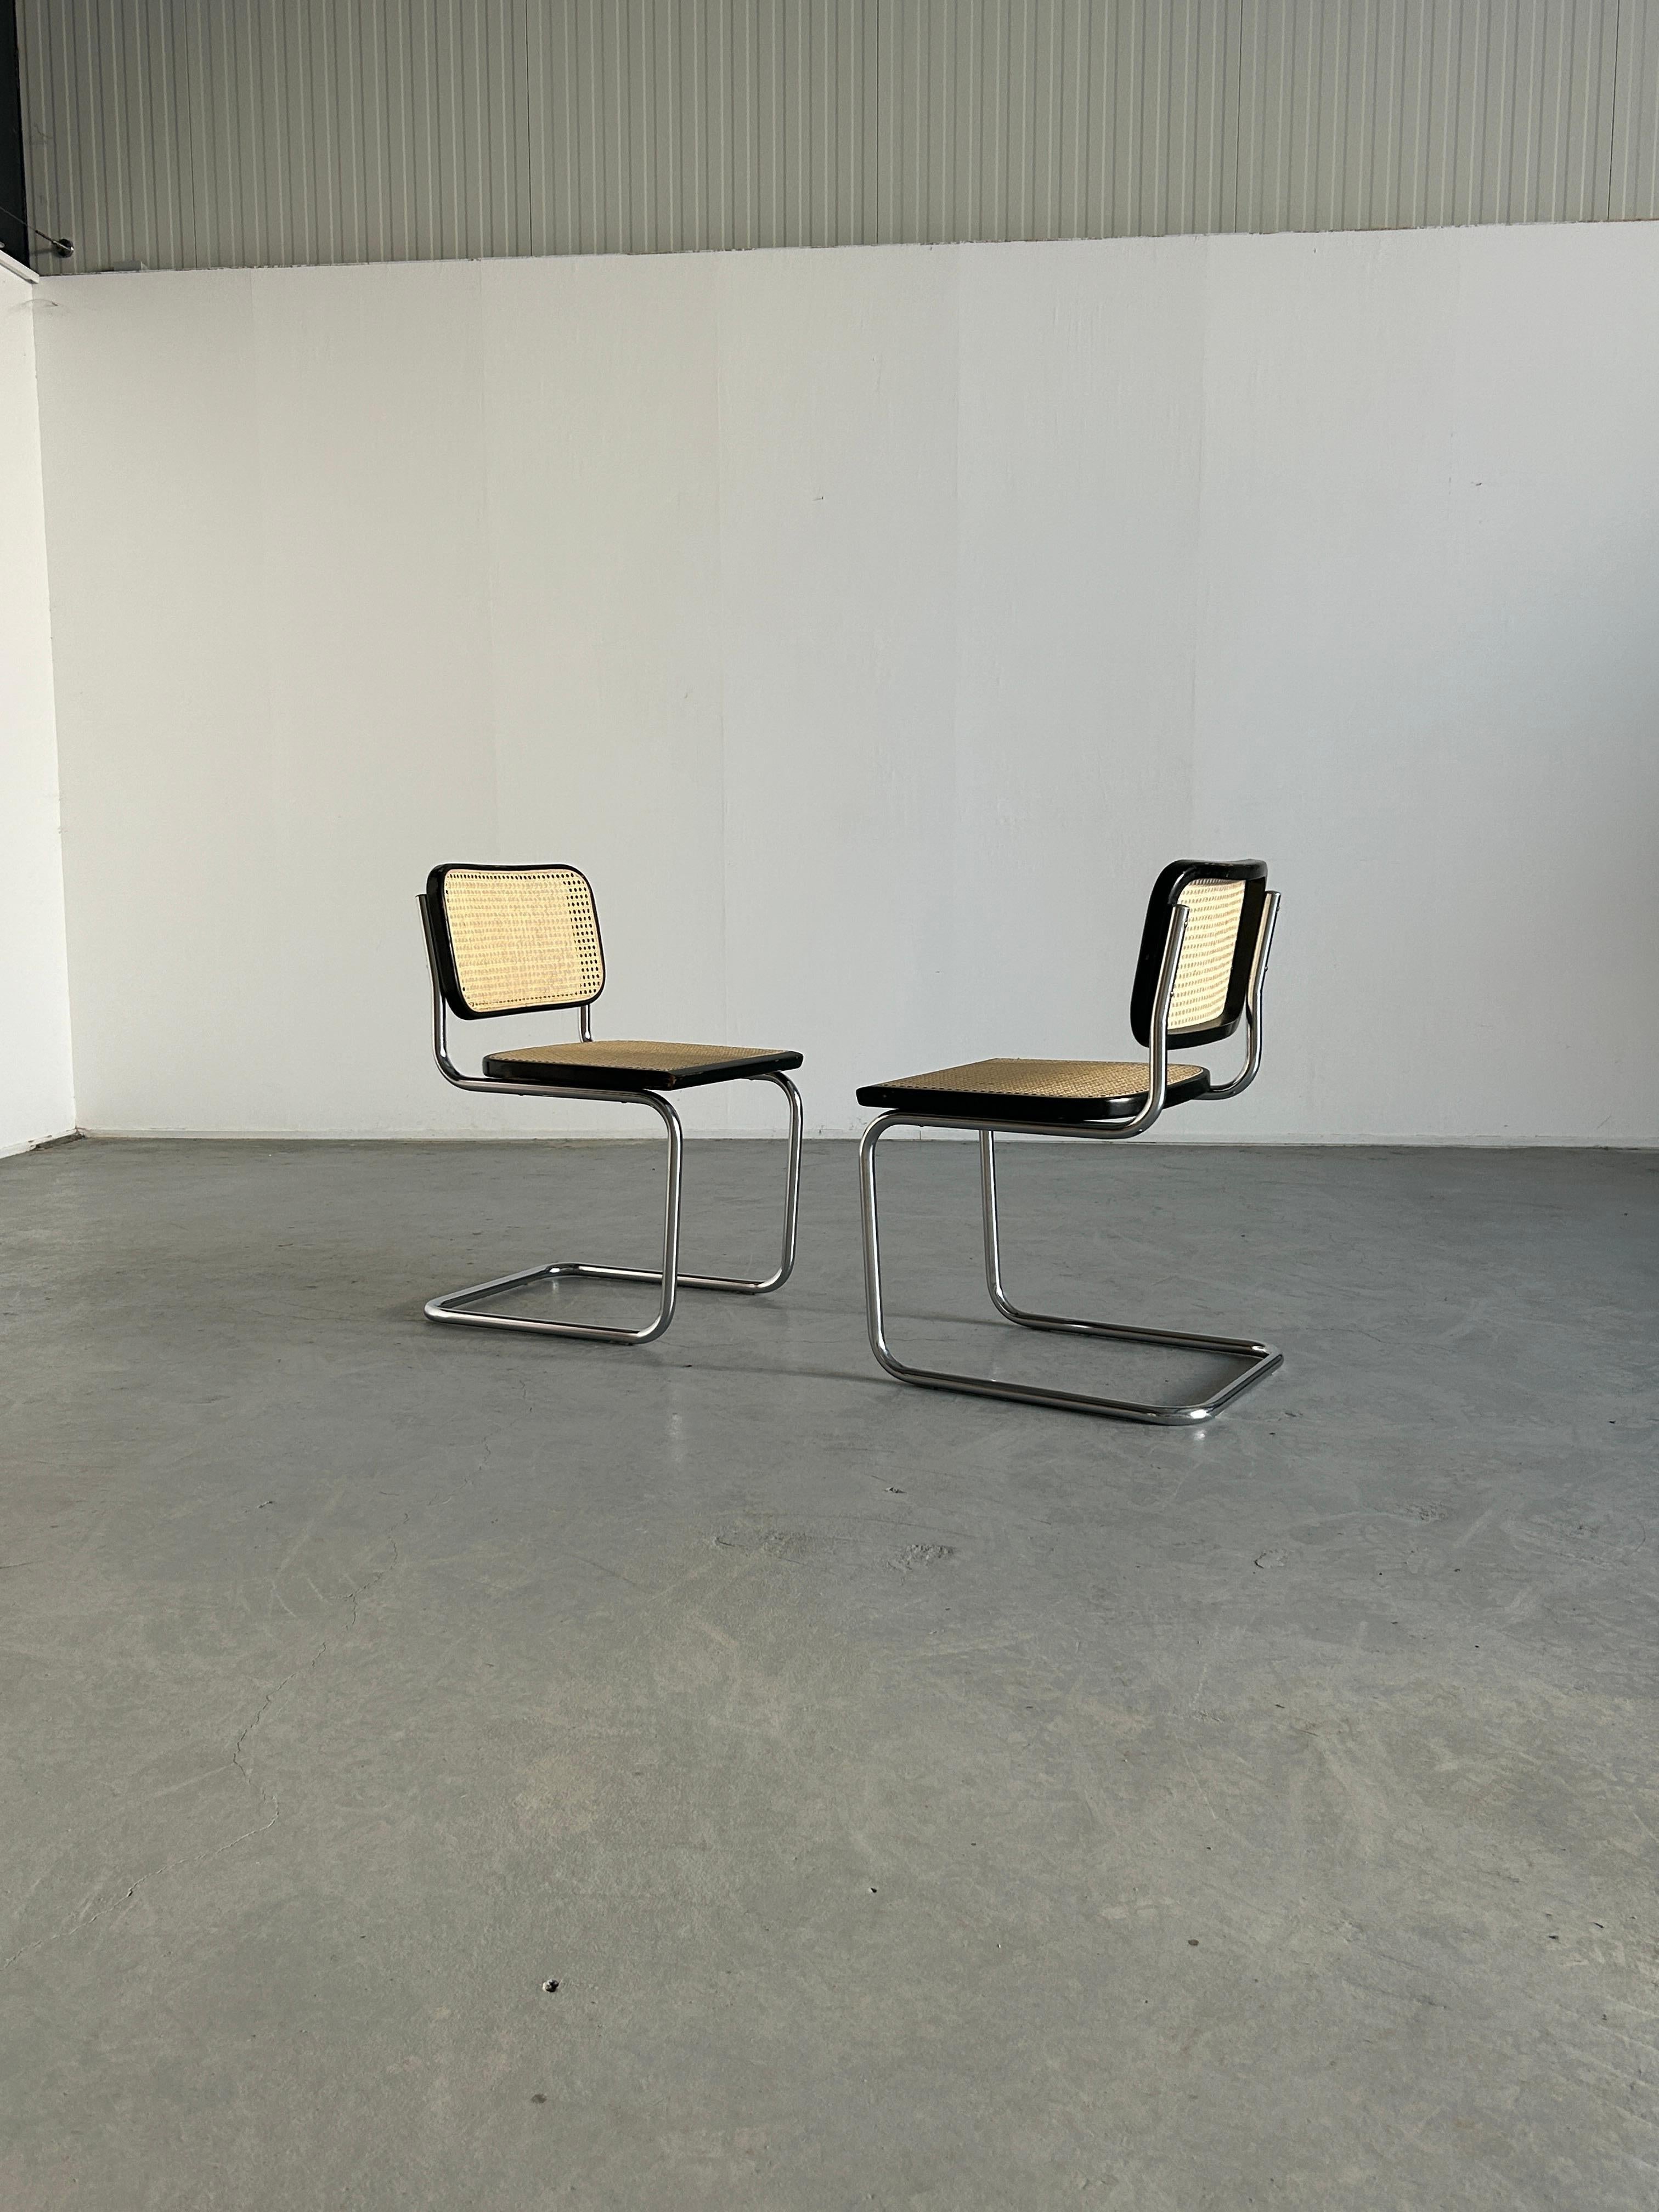 A pair of beautiful vintage Marcel Breuer design B32 cantilever chairs.
Completely original parts, and in original vintage condition.

Old cane replaced with new handmade Roddeka cane from The Netherlands.

No manufacturer's mark present, but the